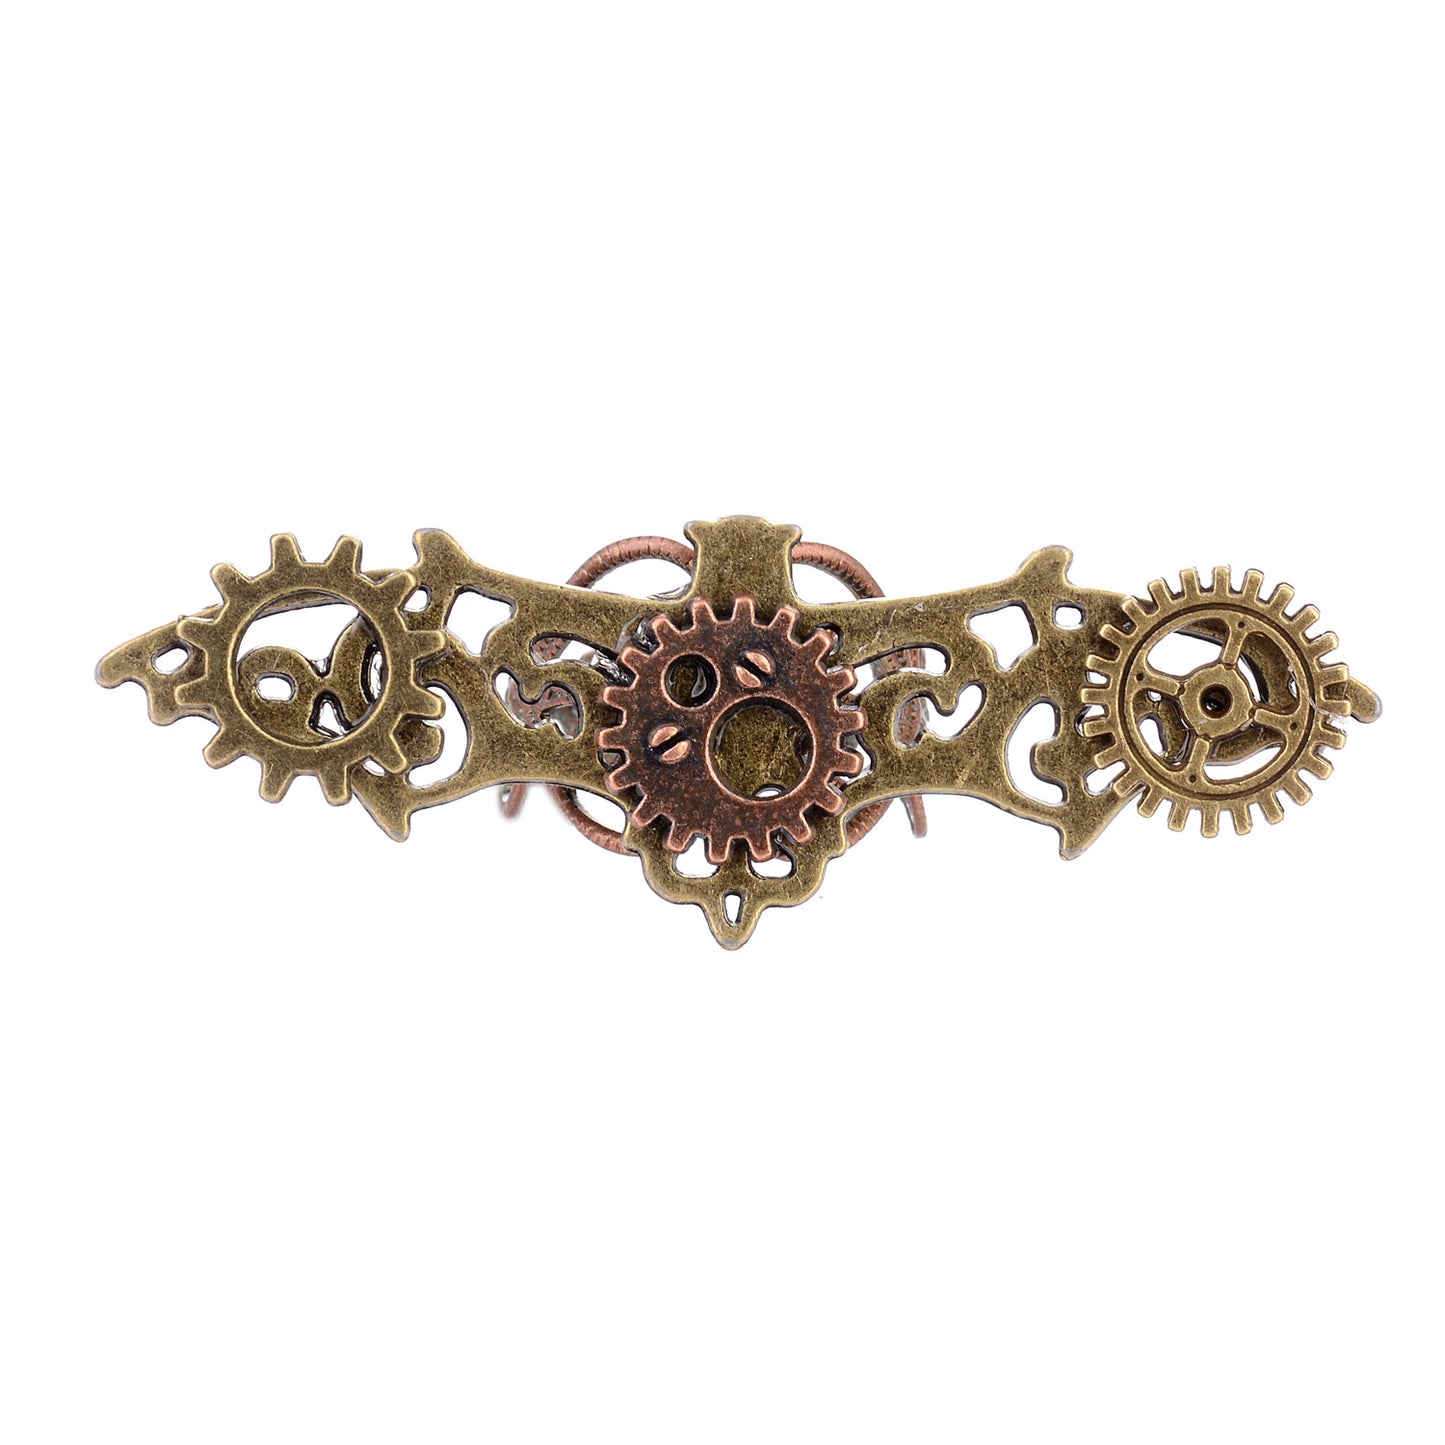 A woman's hand with a Retro Steampunk Bat Gear Ring by Maramalive™ on it.